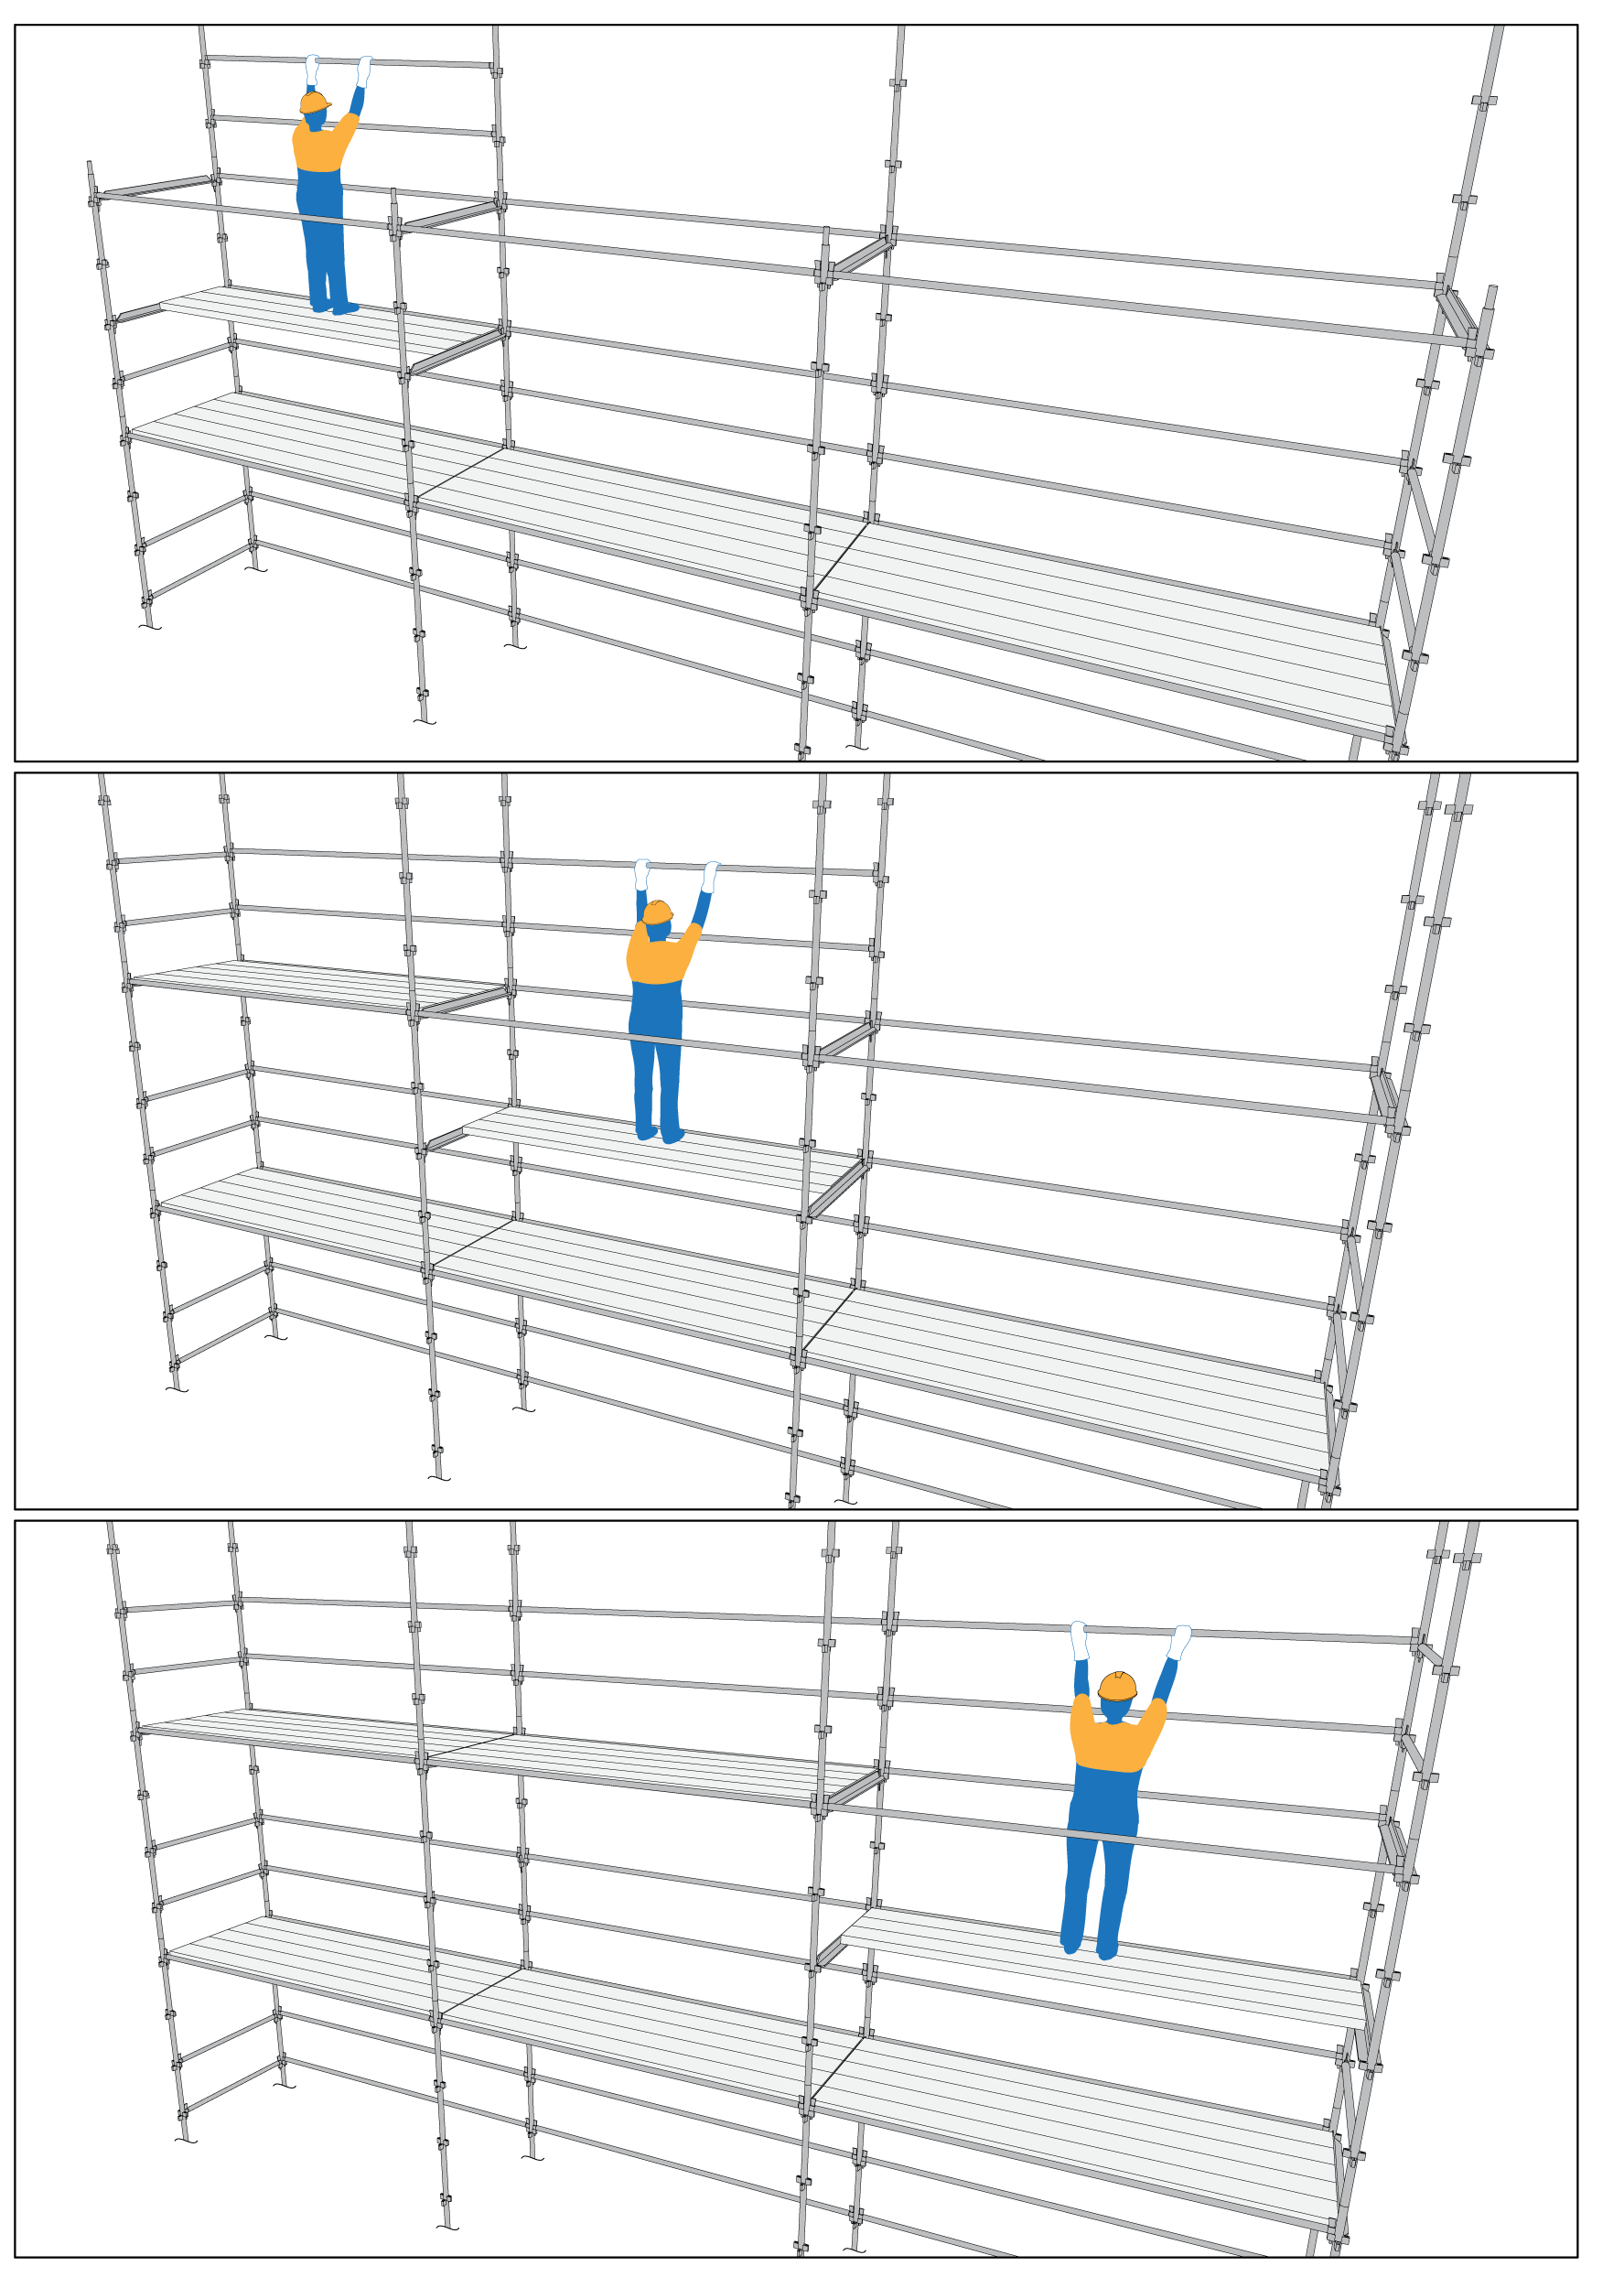 Figure 3: Diagrammatic illustration of an erection platform option for a five-plank-wide scaffold.Note: Scaffold is shown against an existing building, so guardrails only needed on external face. Access ladder and toeboards omitted for clarity.